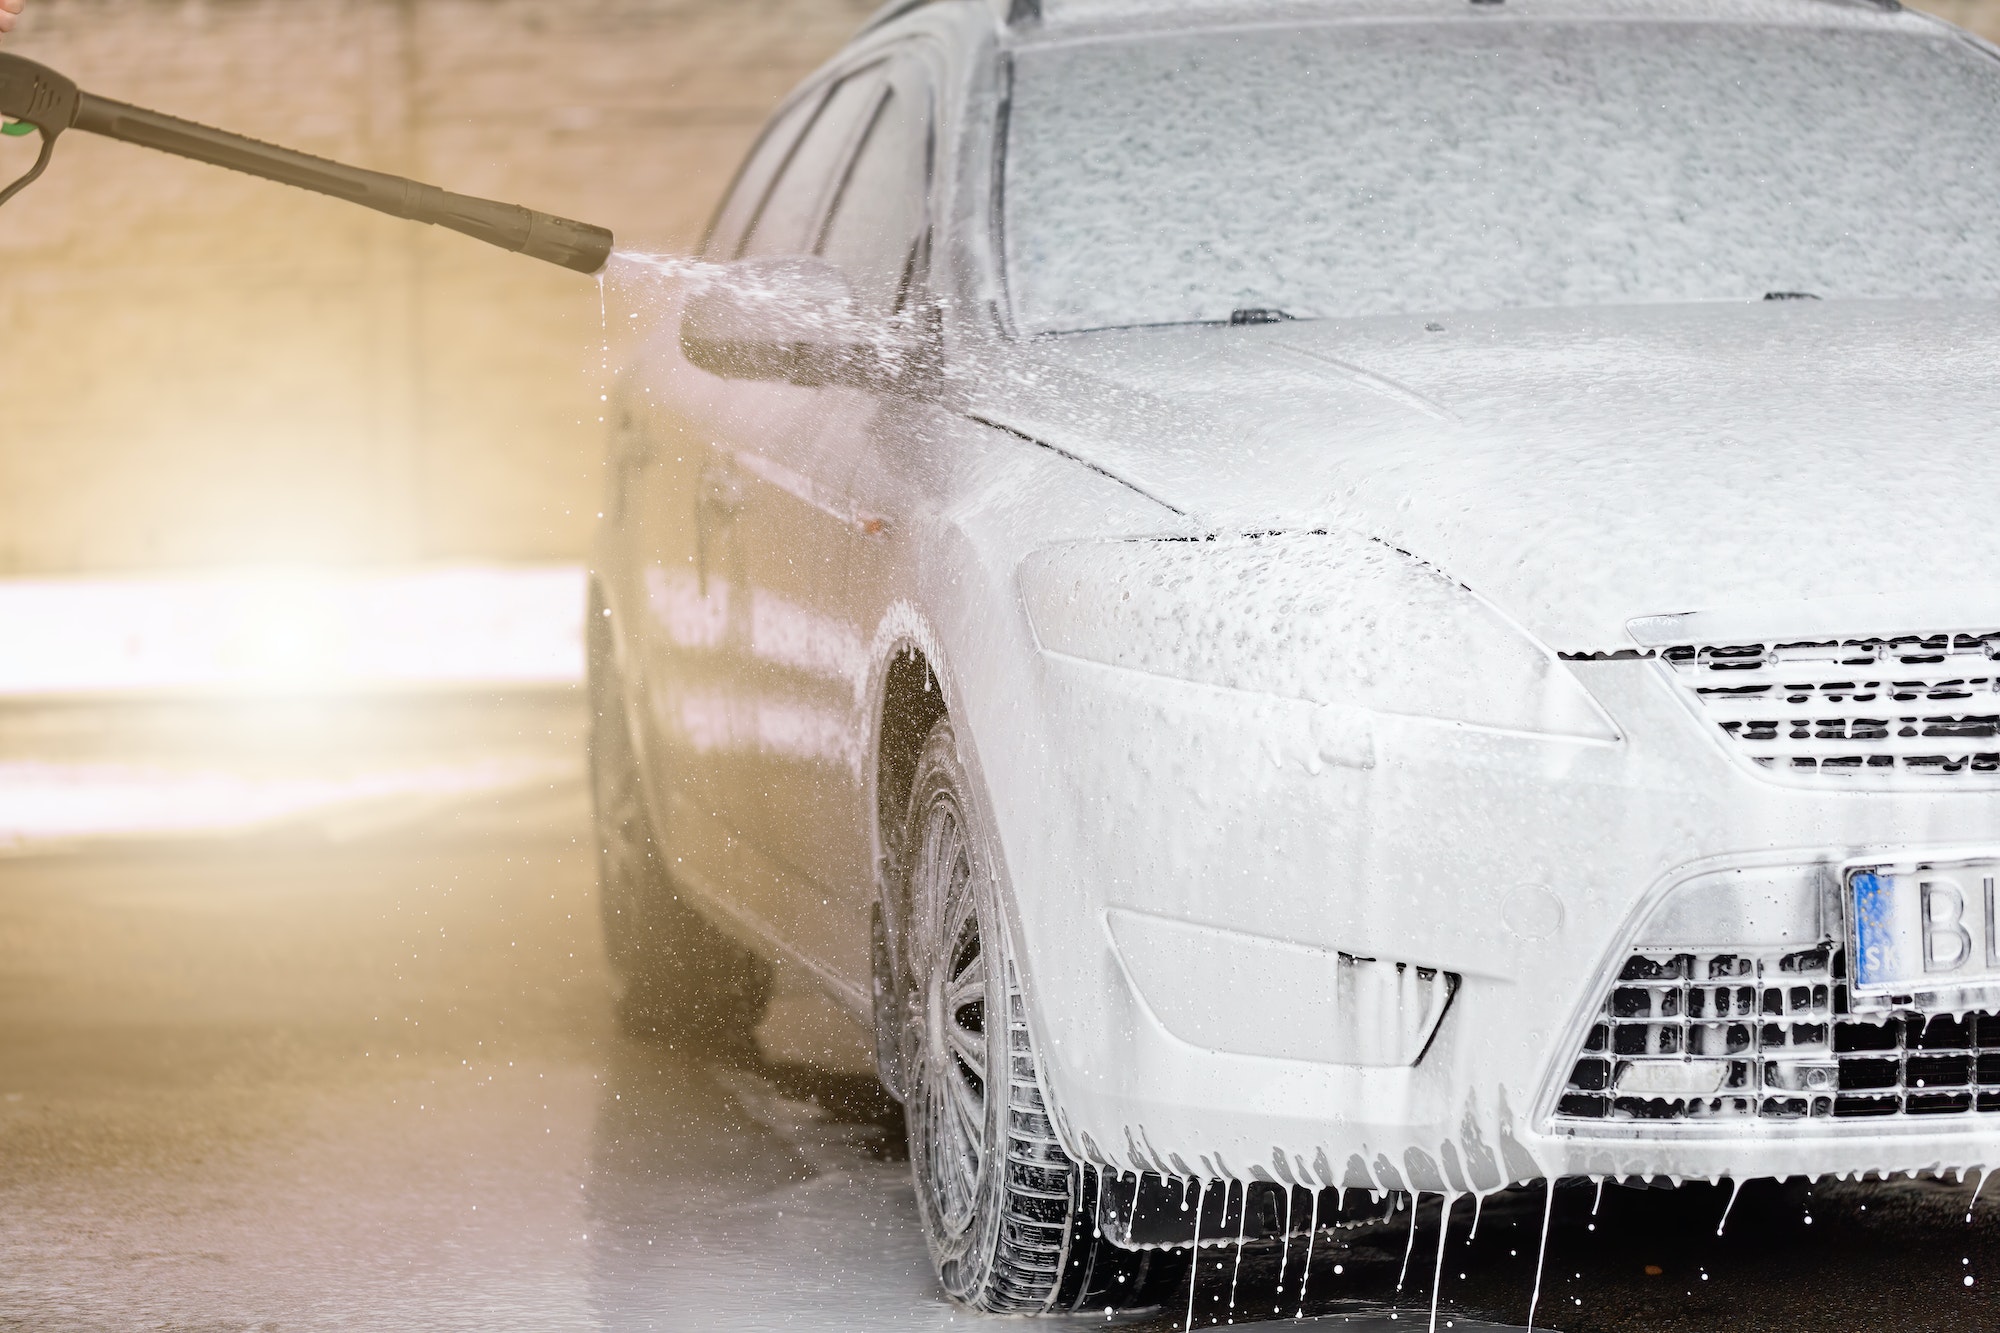 High pressure automobile cleaning with foam in car wash